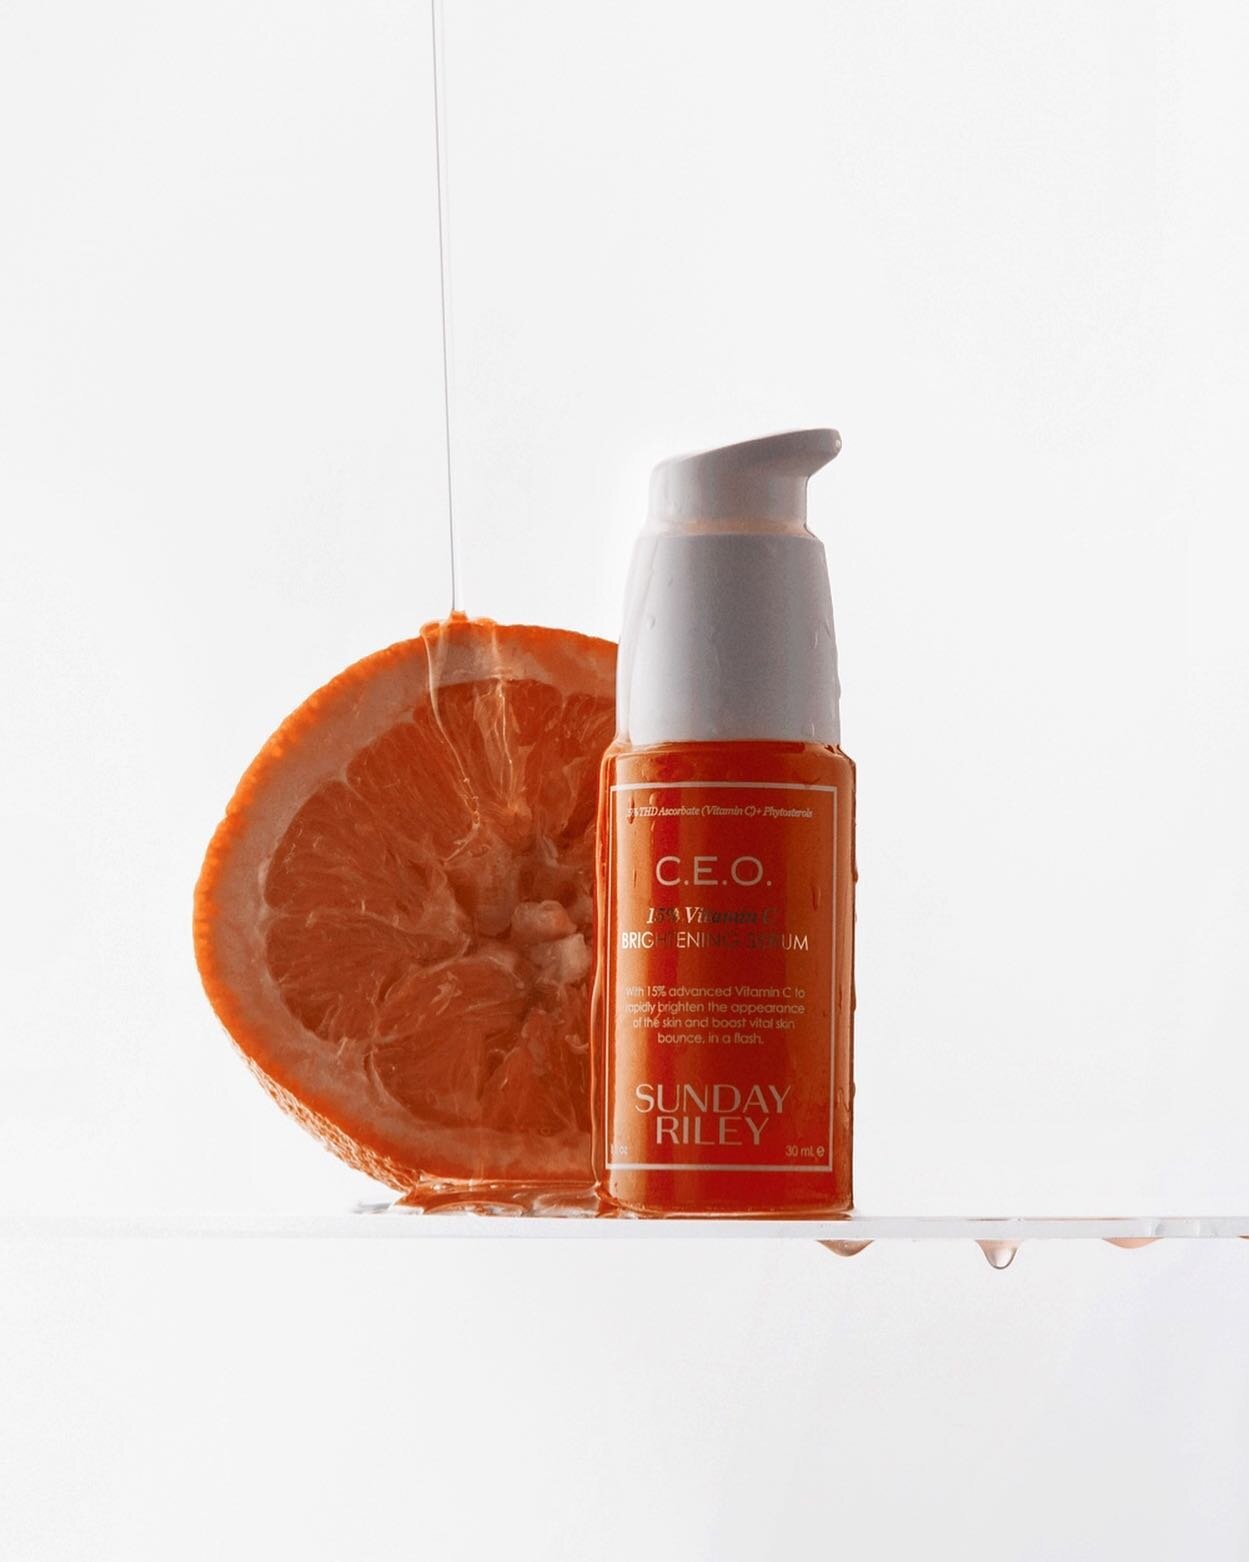 @SundayRiley 15% CEO Vitamin C Brightening Serum lightens discoloration, reduces redness and the appearance of pores. You can use vitamin C day or night but I prefer to use at night so I wake up with a glow and I don't have to worry about layering to